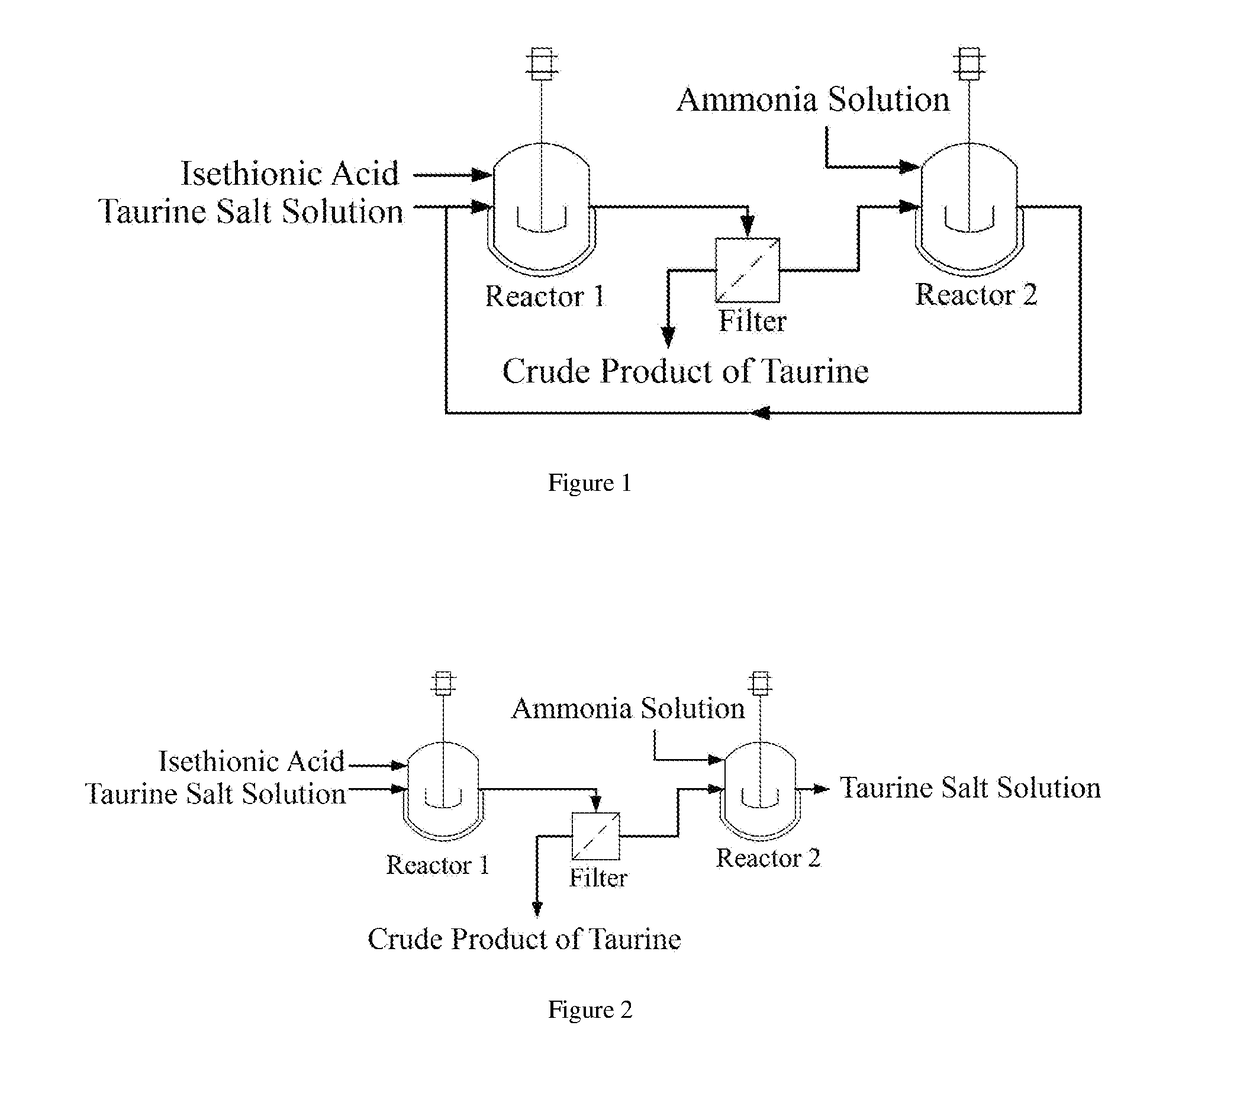 A process for producing taurine